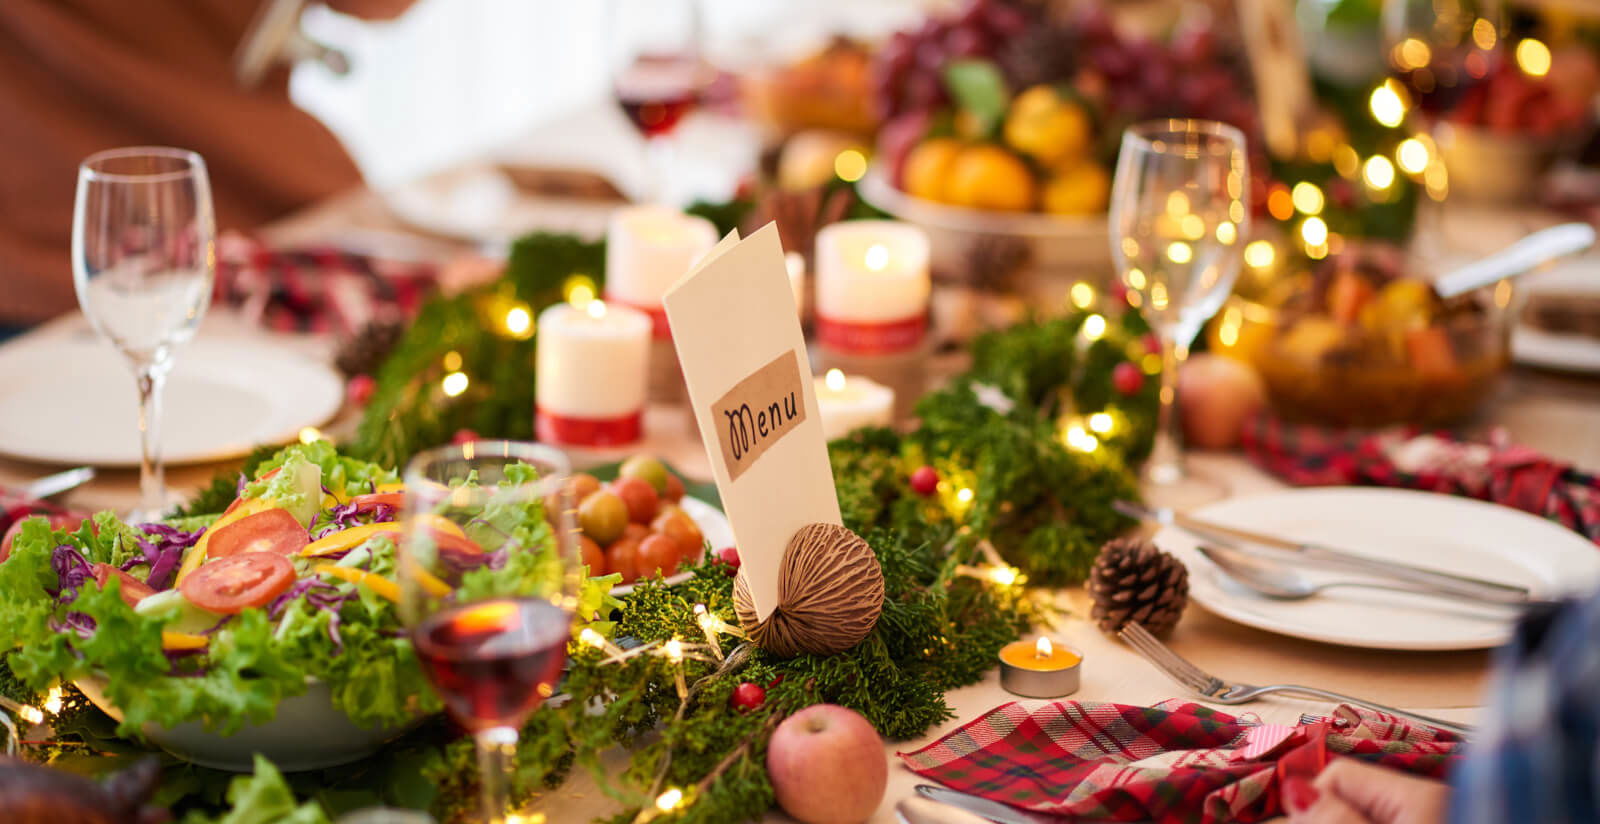 Grand Hotel Mediterraneo - The restaurants for Christmas Lunch in Florence at the Grand Hotel Mediterraneo 2